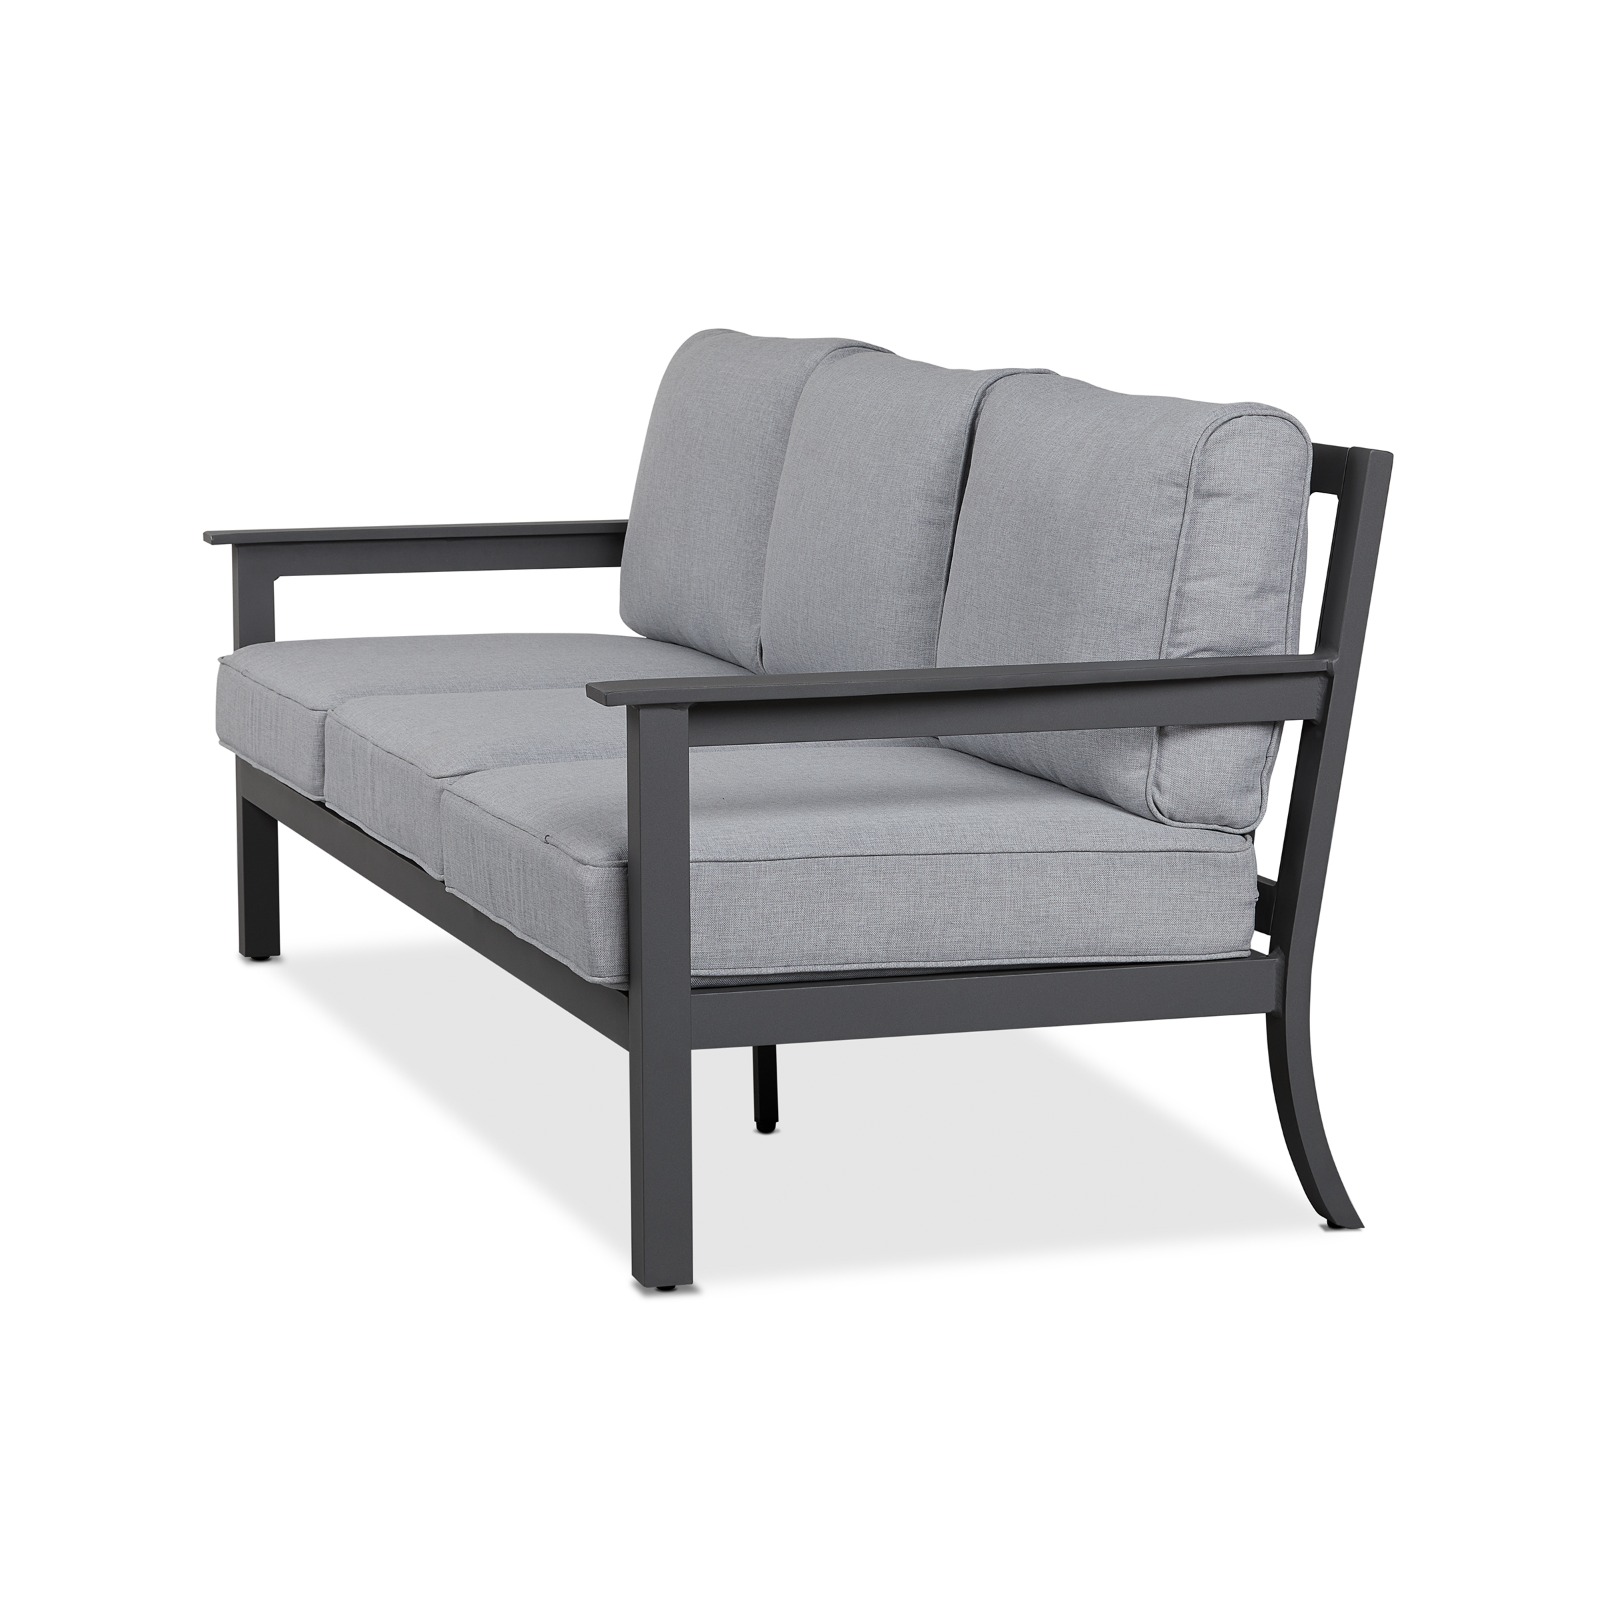 Ortun Outdoor Three Seat Sofa Couch Patio Furniture